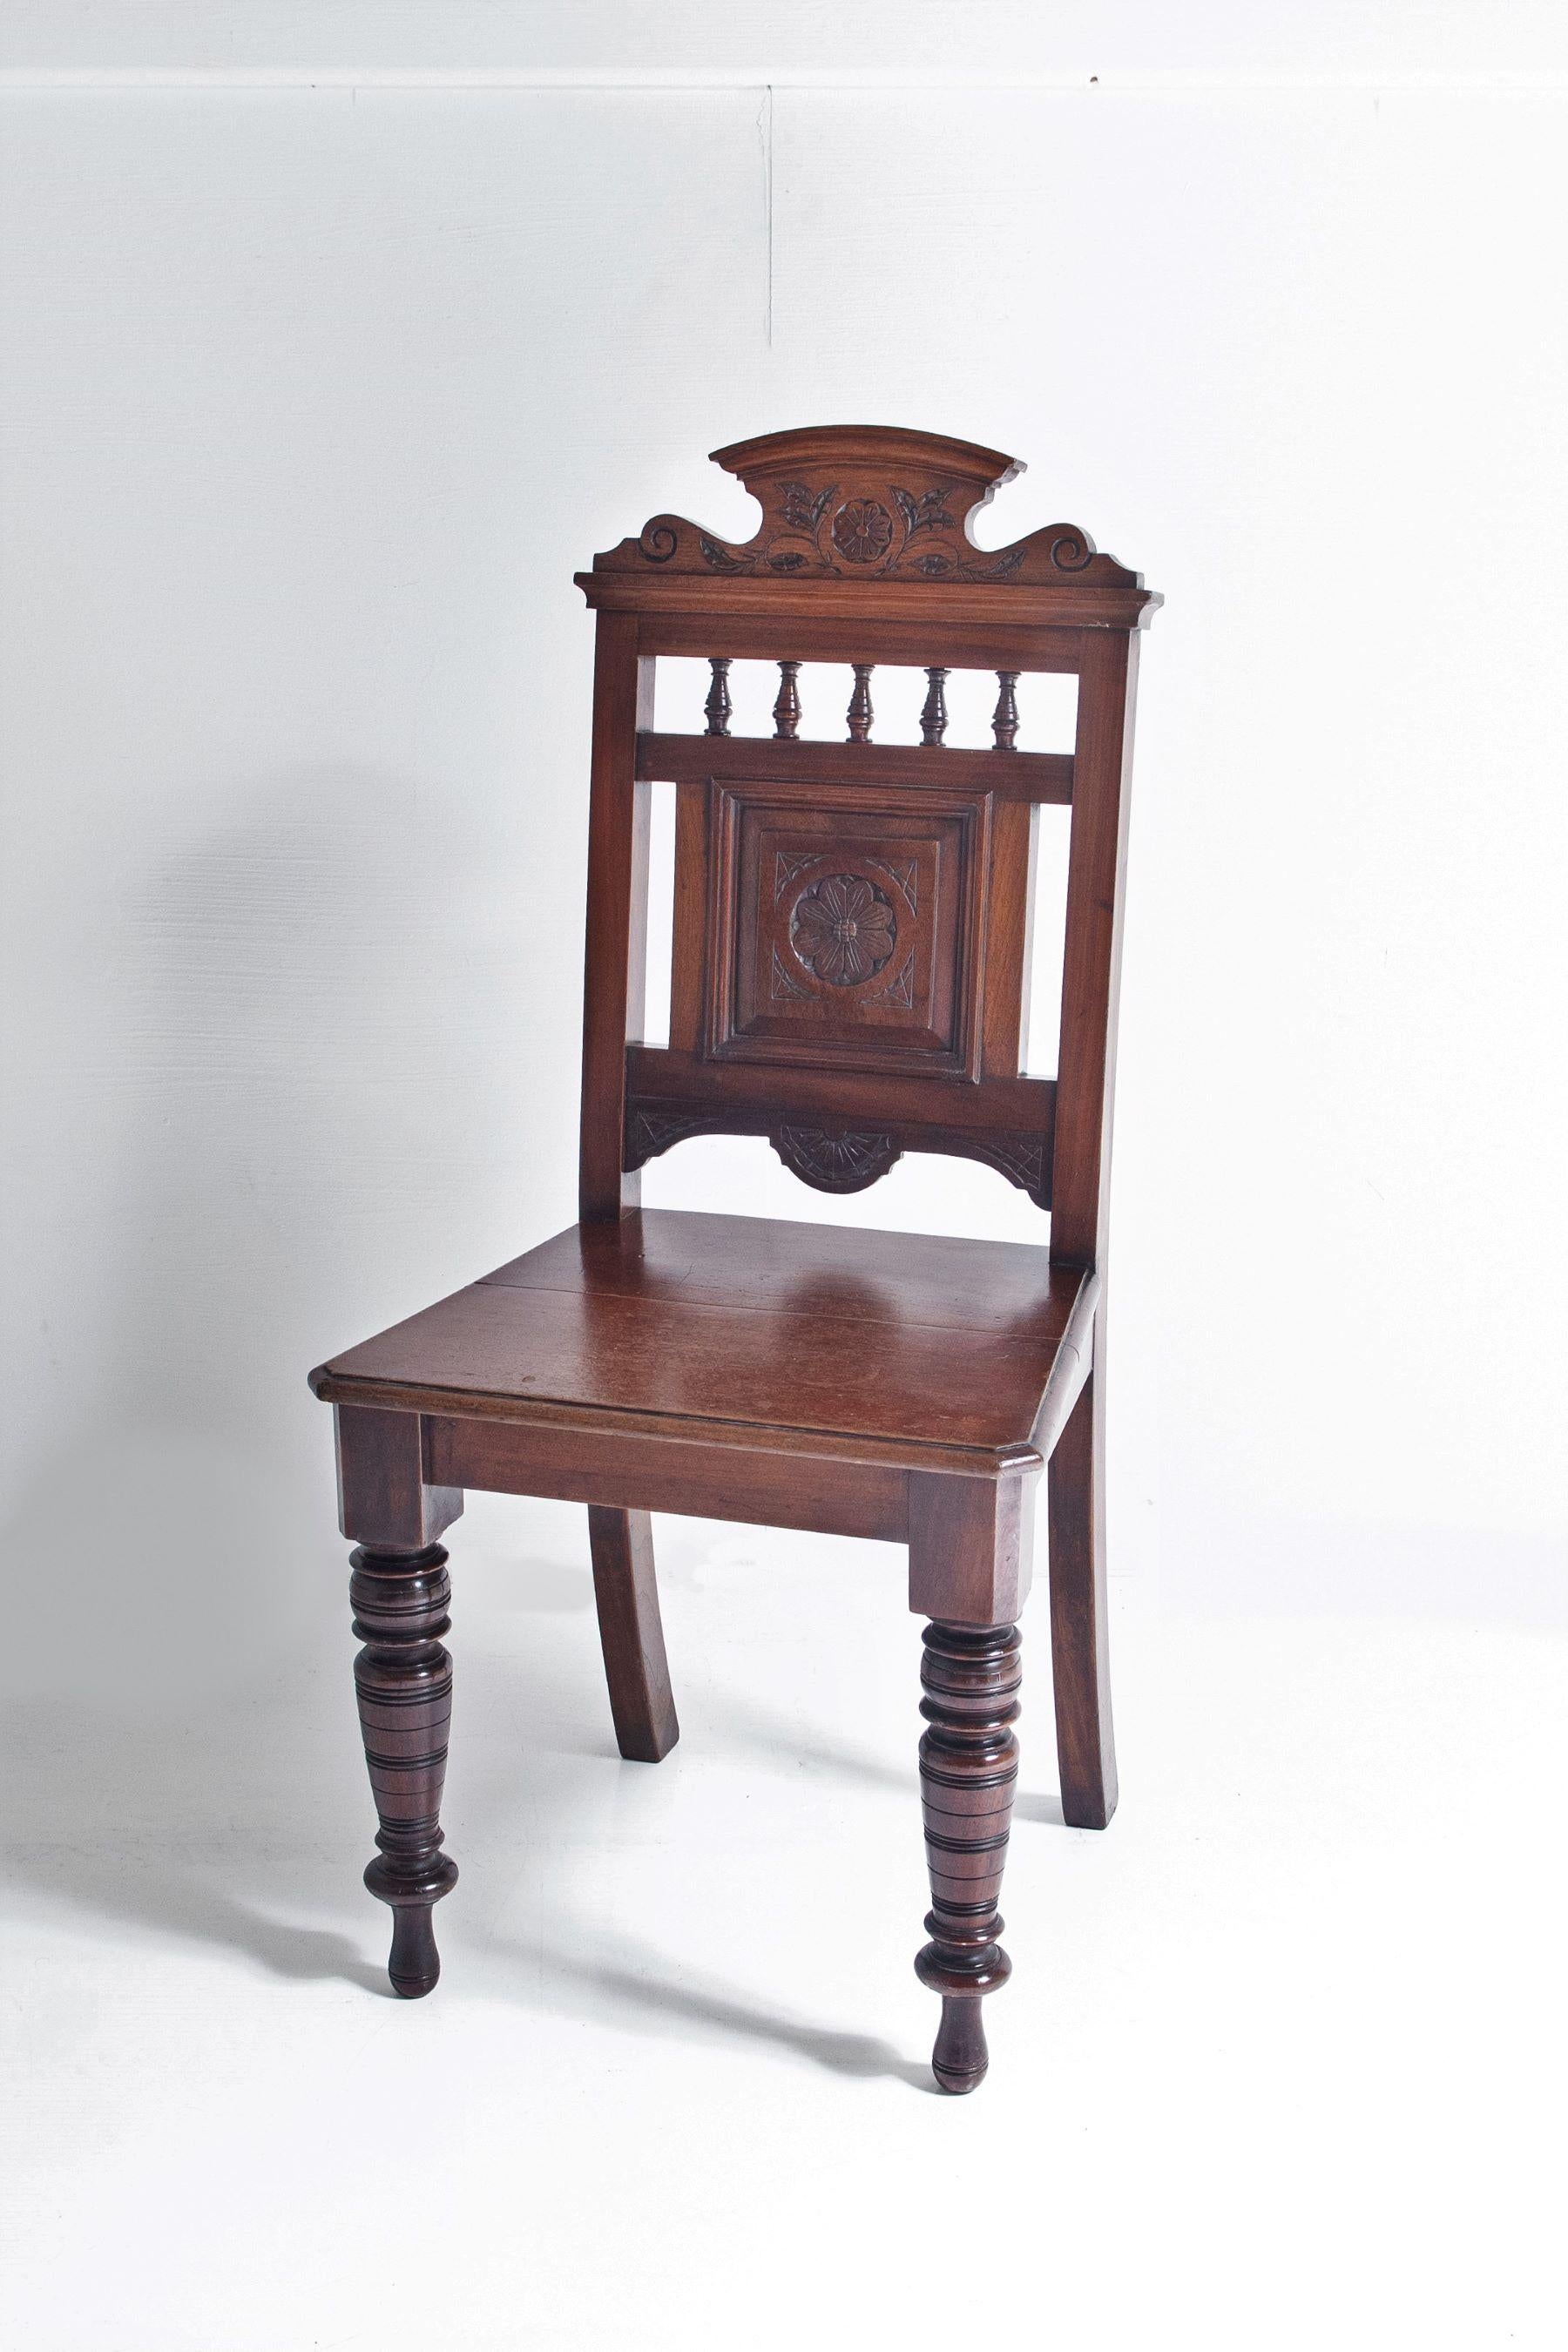 A beautifully crafted Aesthetic Hall Chair, carved foliage and scroll detailing with arched top. Lovely turned front legs with the most superb narrow bobbin front feet.
Solid oak with mixed hardwood, in a rich deep colour with lovely wear.
A small